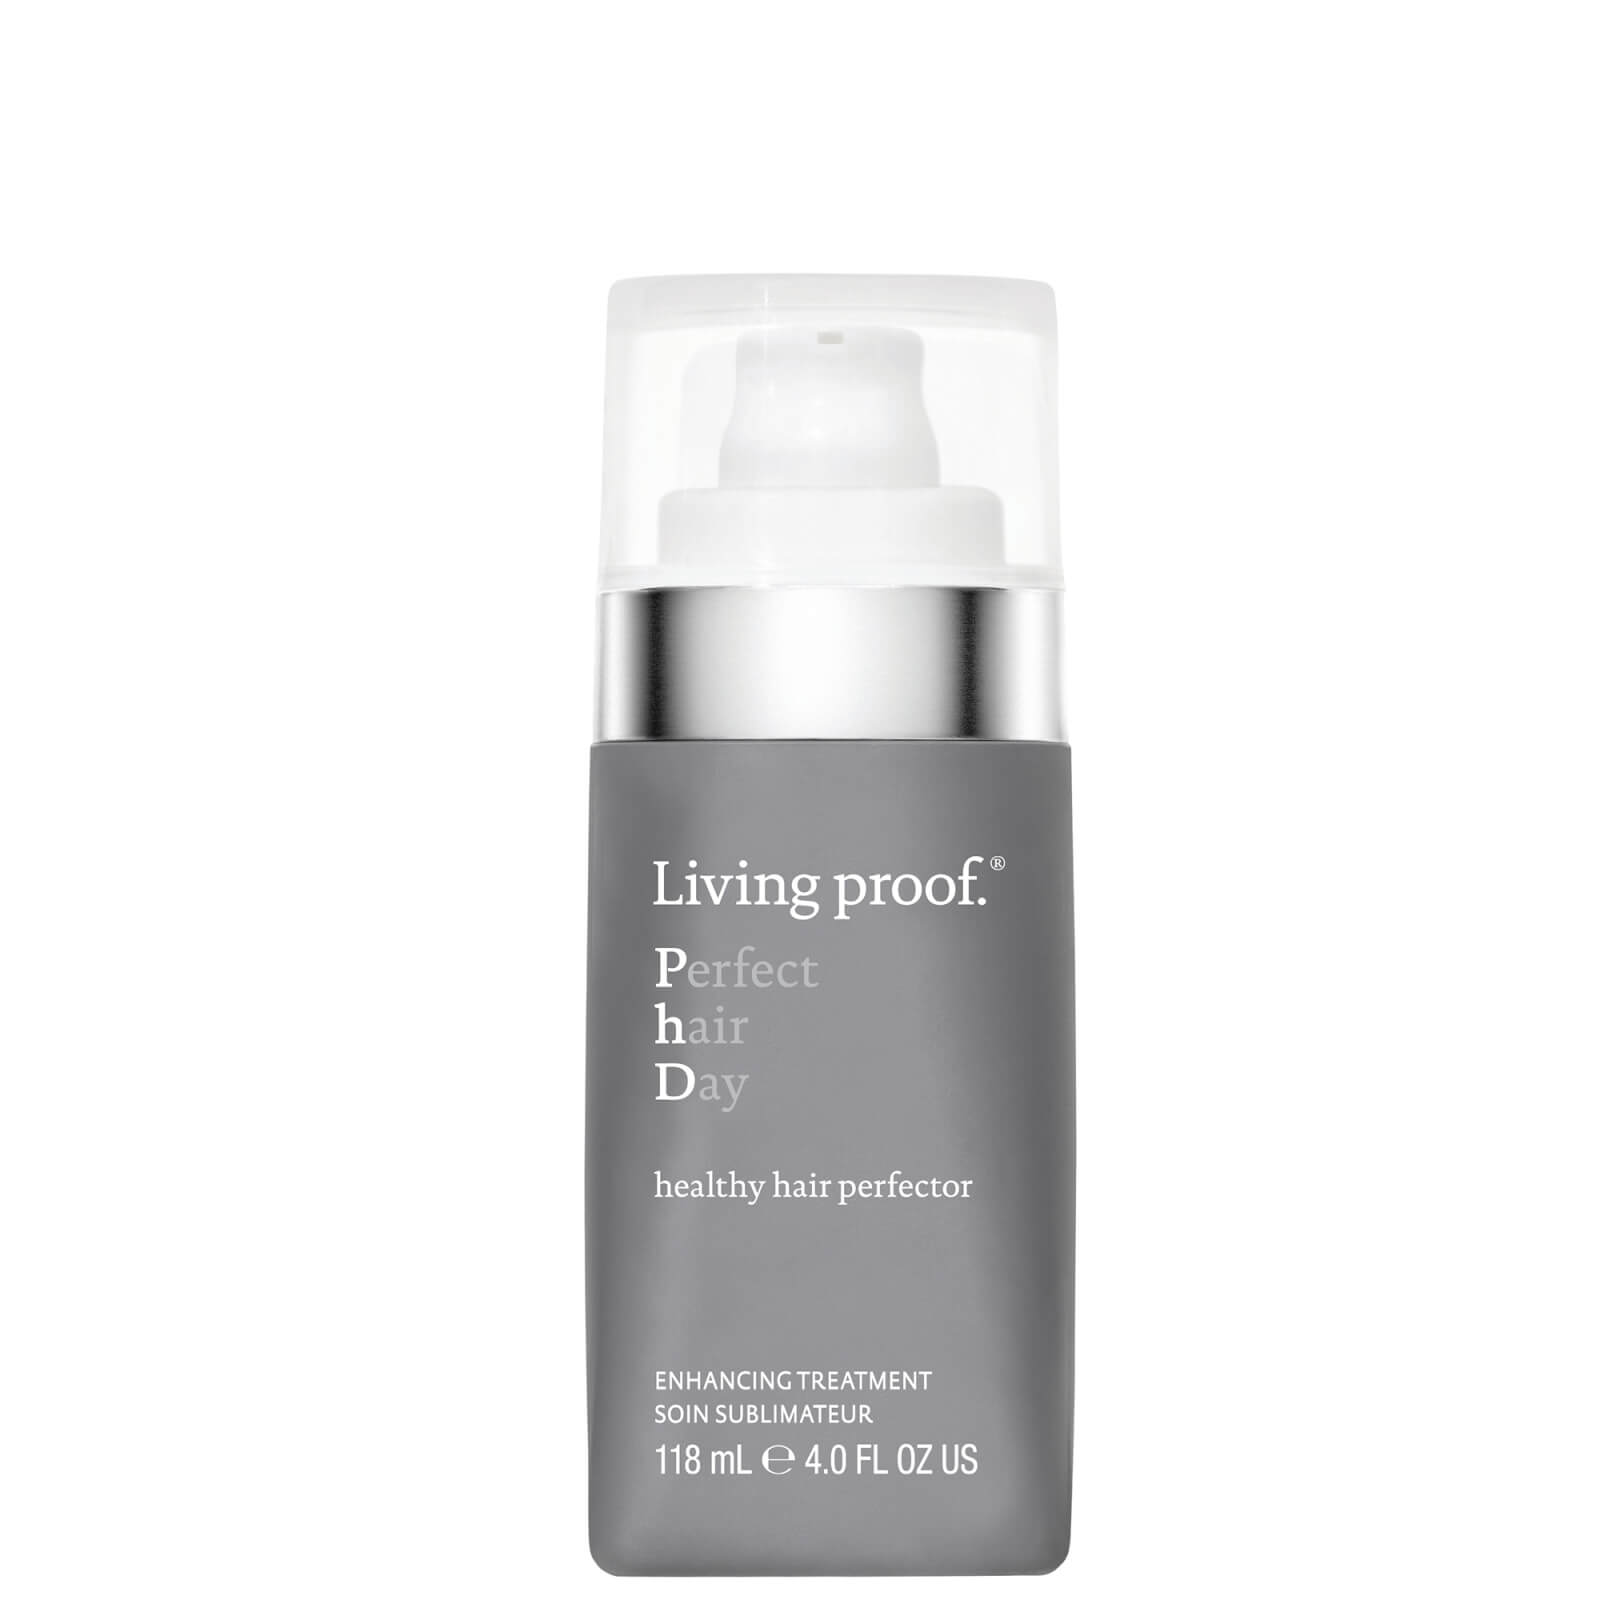 Image of Living Proof Perfect hair Day (PhD) Healthy Hair Perfector 4oz